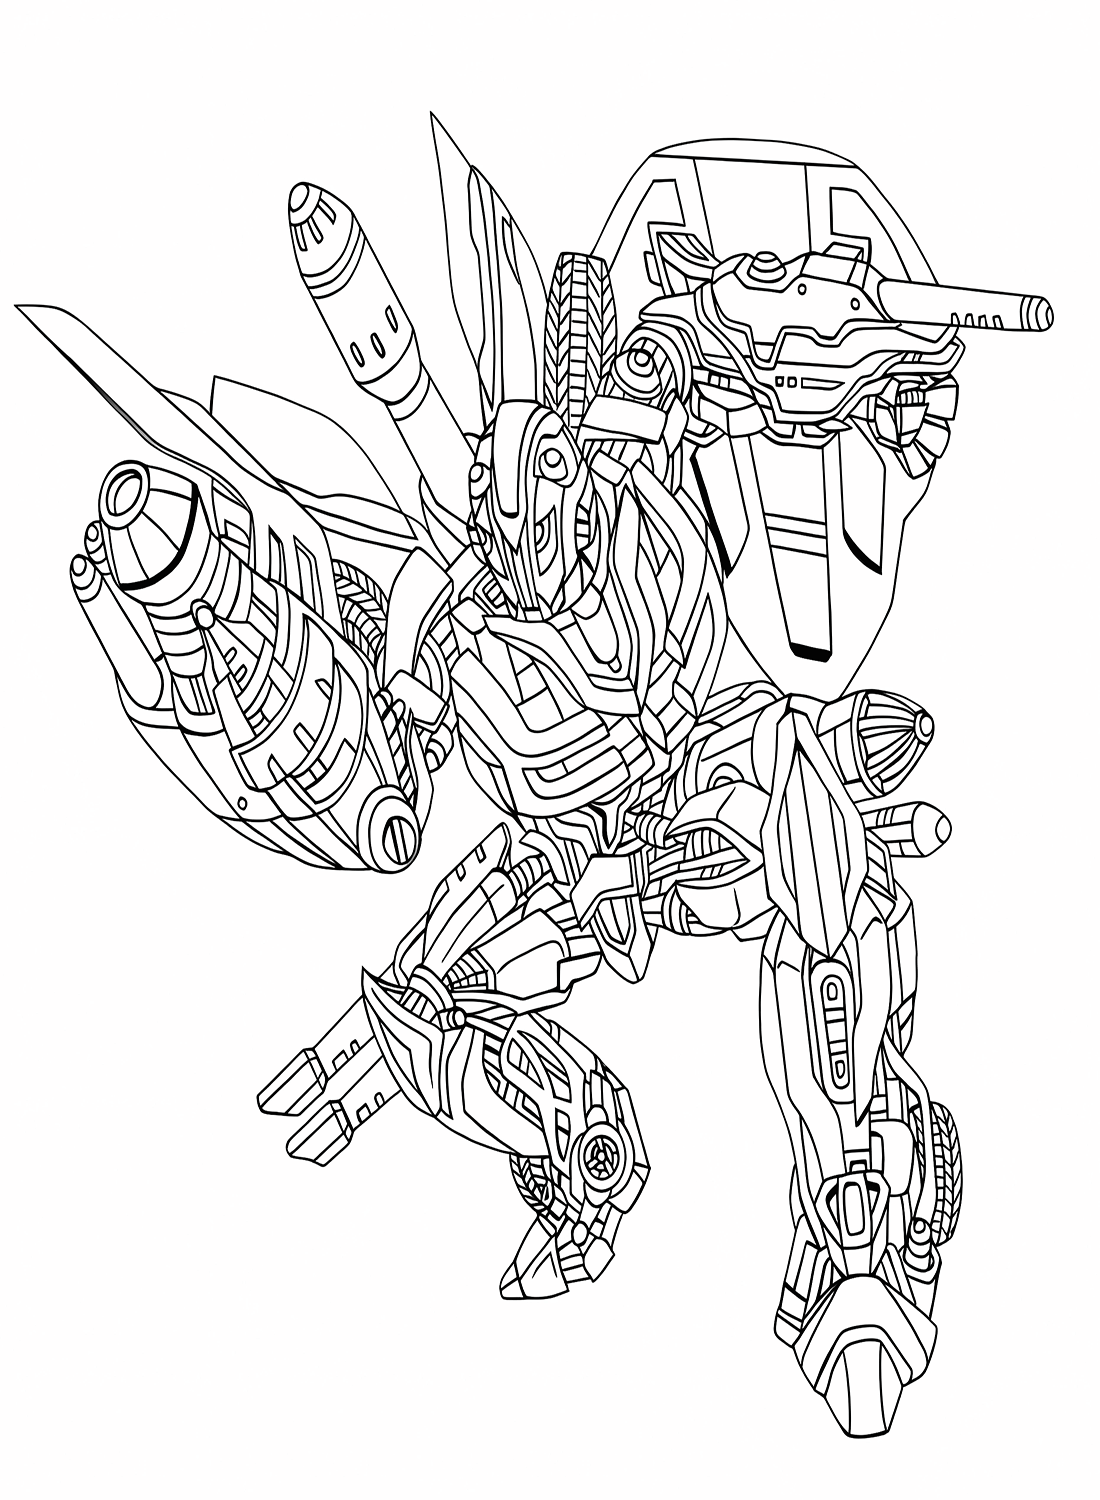 Bumblebee with Weapons Coloring Pages